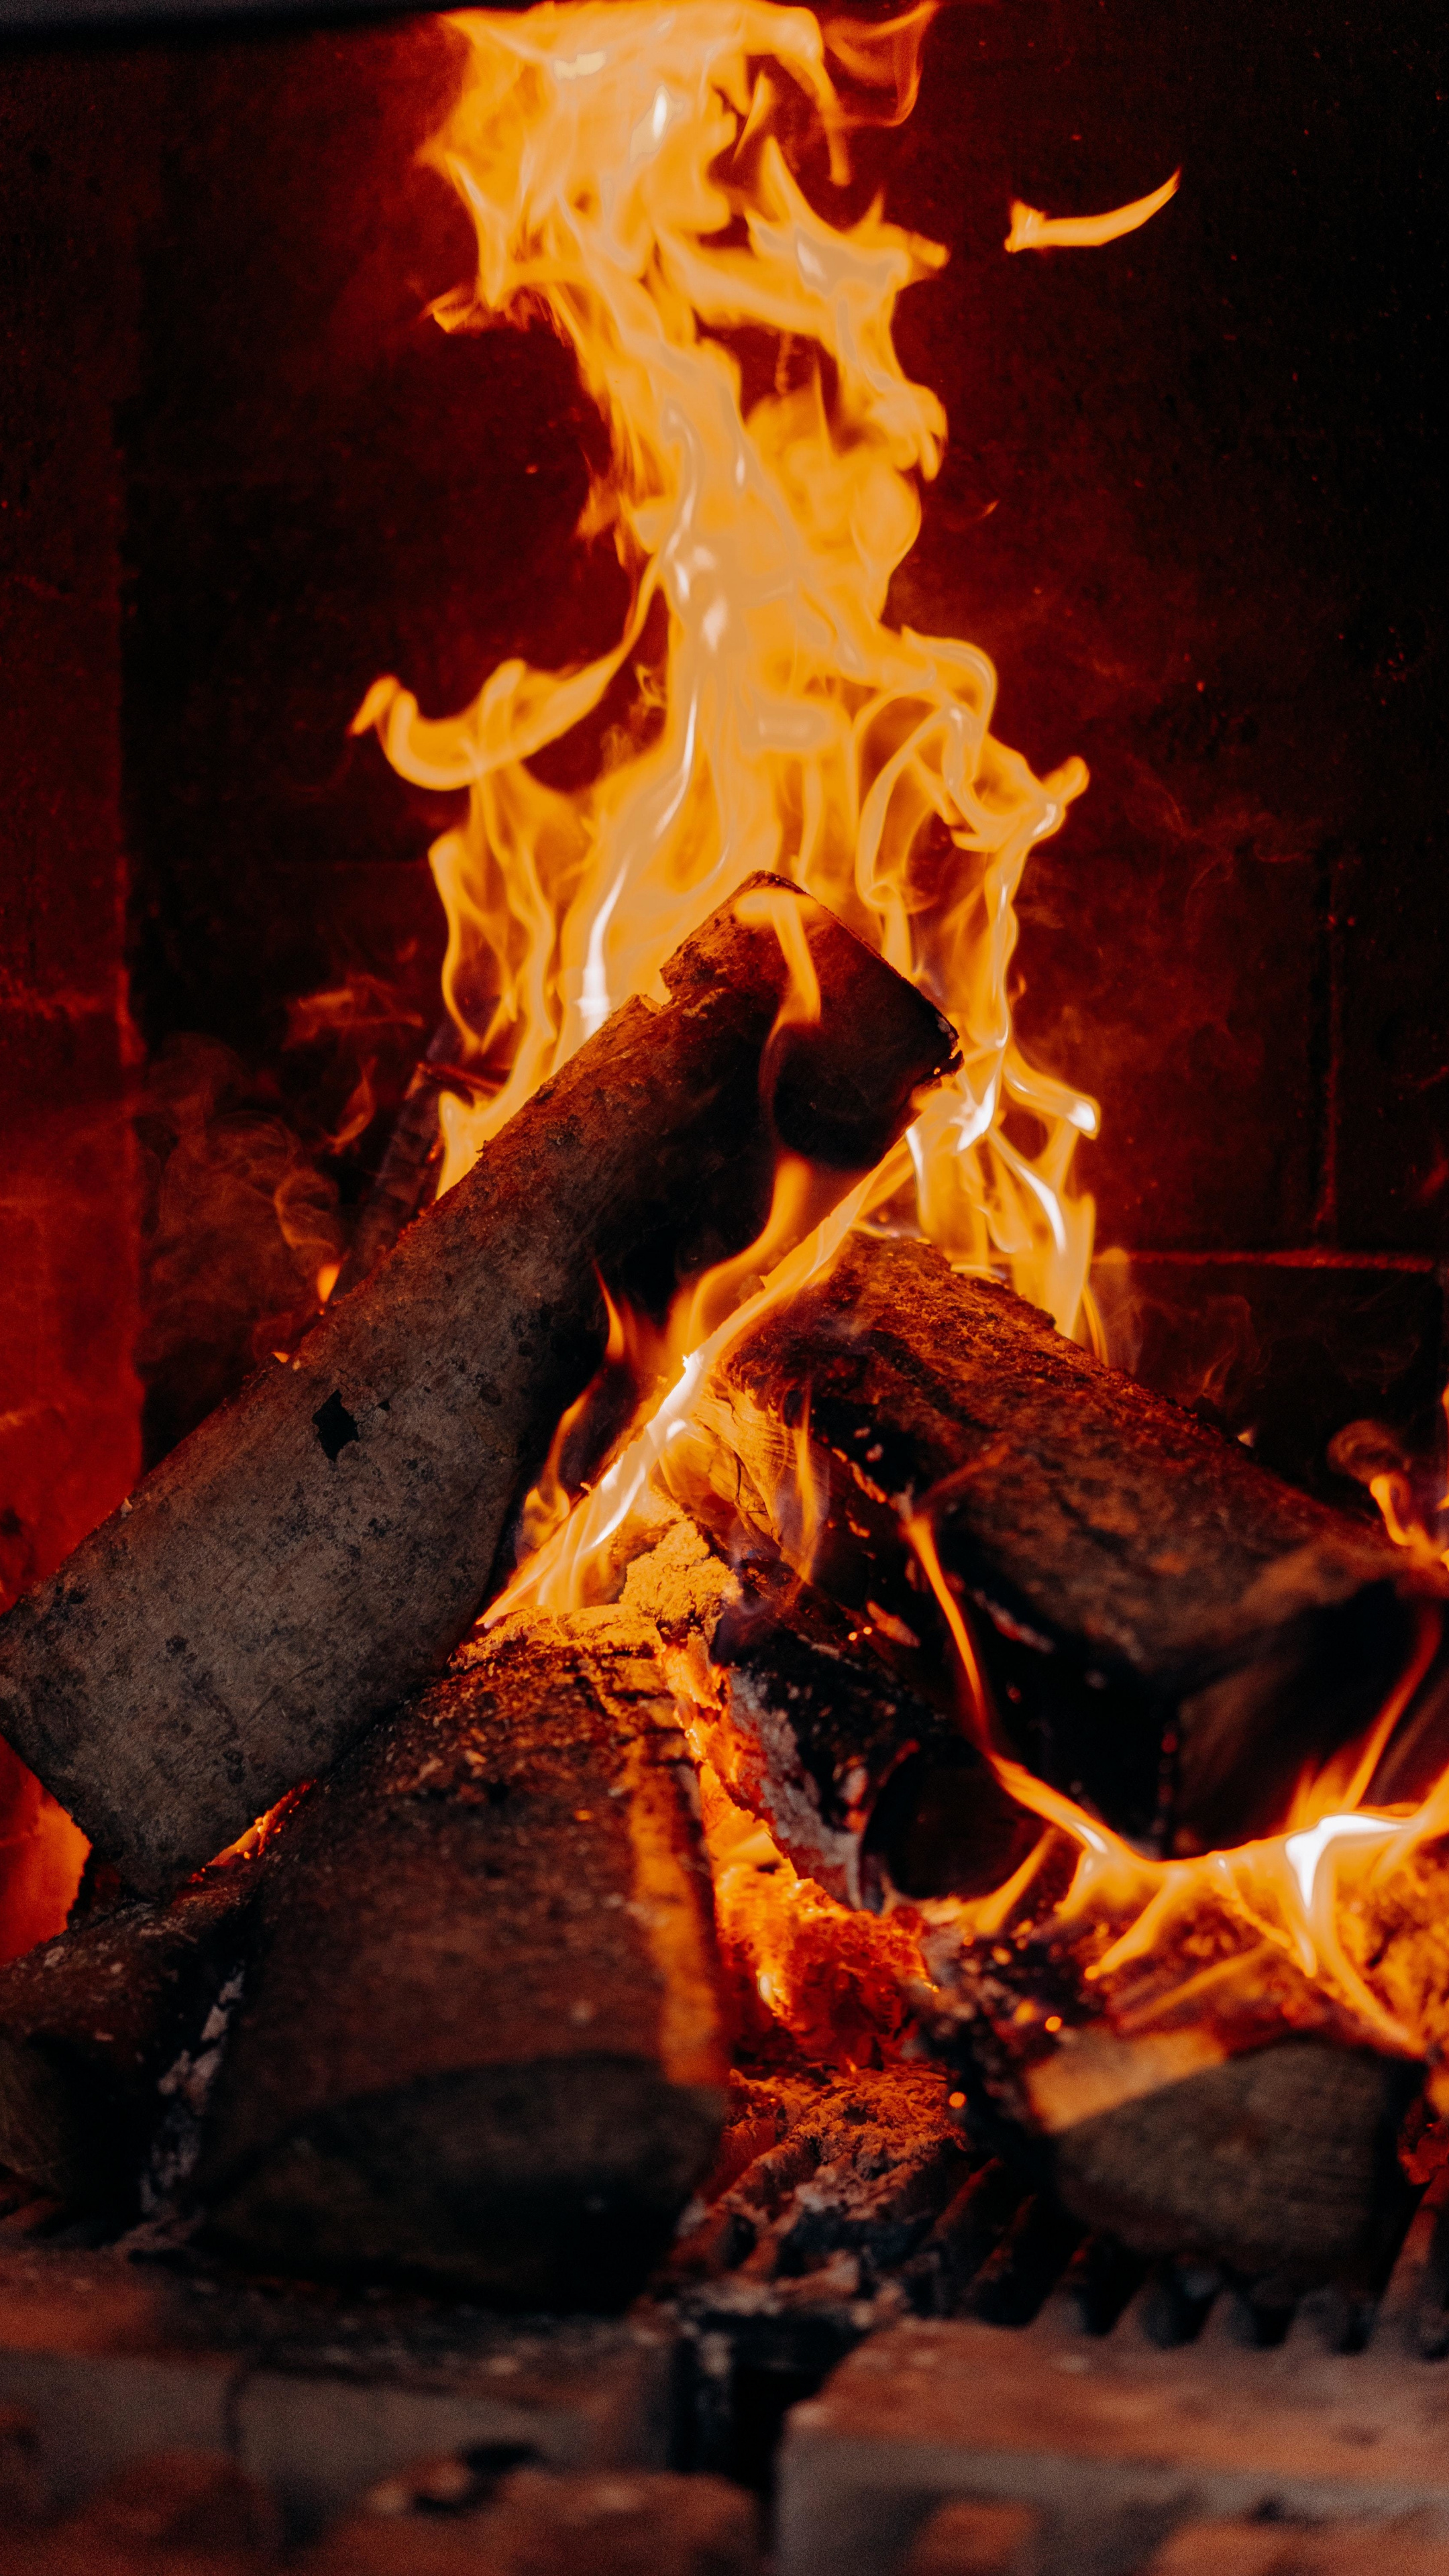 Wood fire close up, Sony Xperia Z5 Premium Dual HD image, Flame close up visuals, Flame images, Fire wallpaper backgrounds, 2160x3840 4K Phone